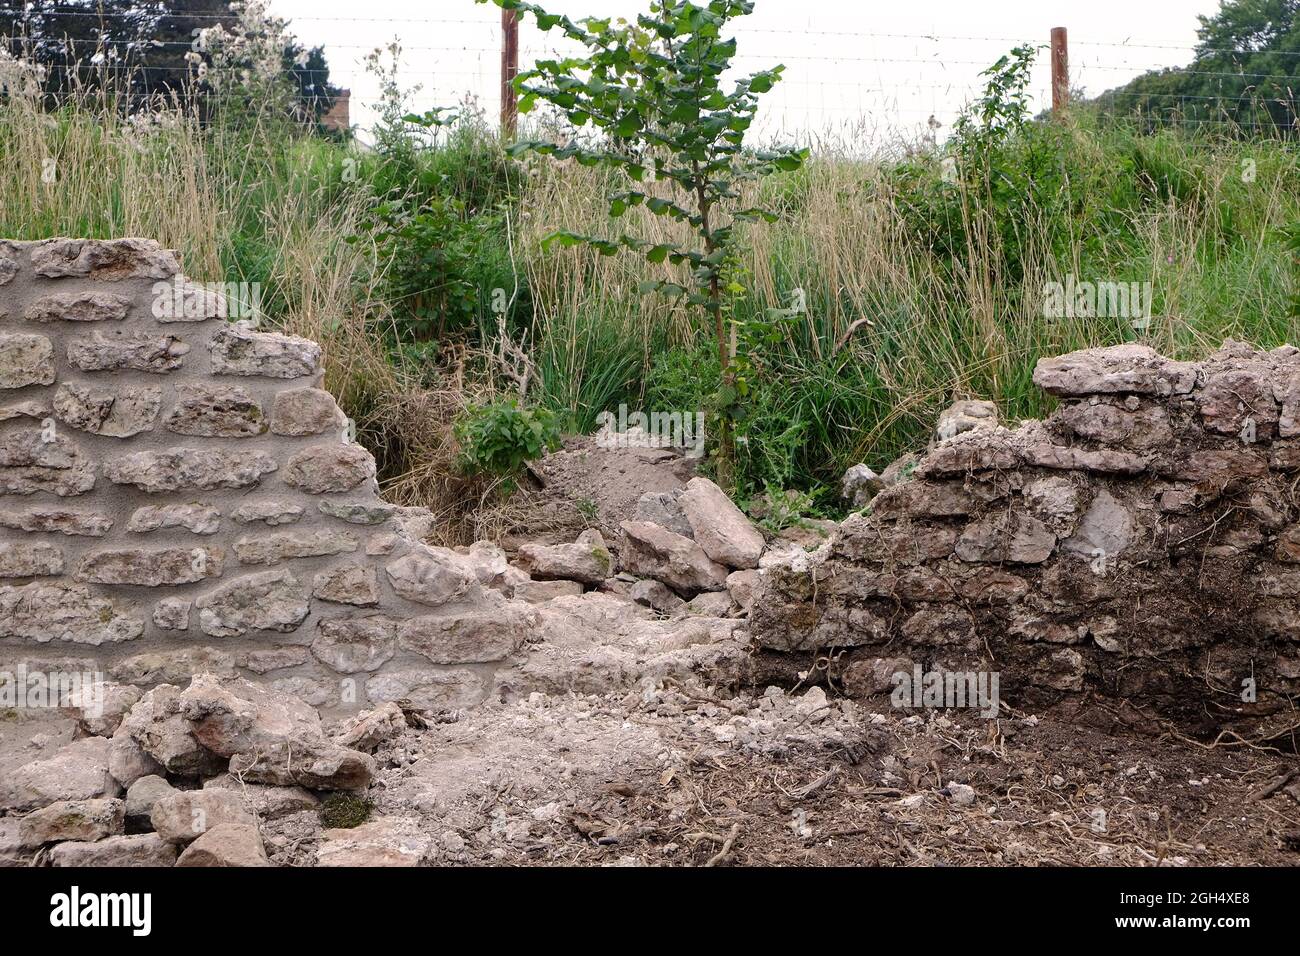 September 2021 - New stone wall being built in a traditional style Stock Photo